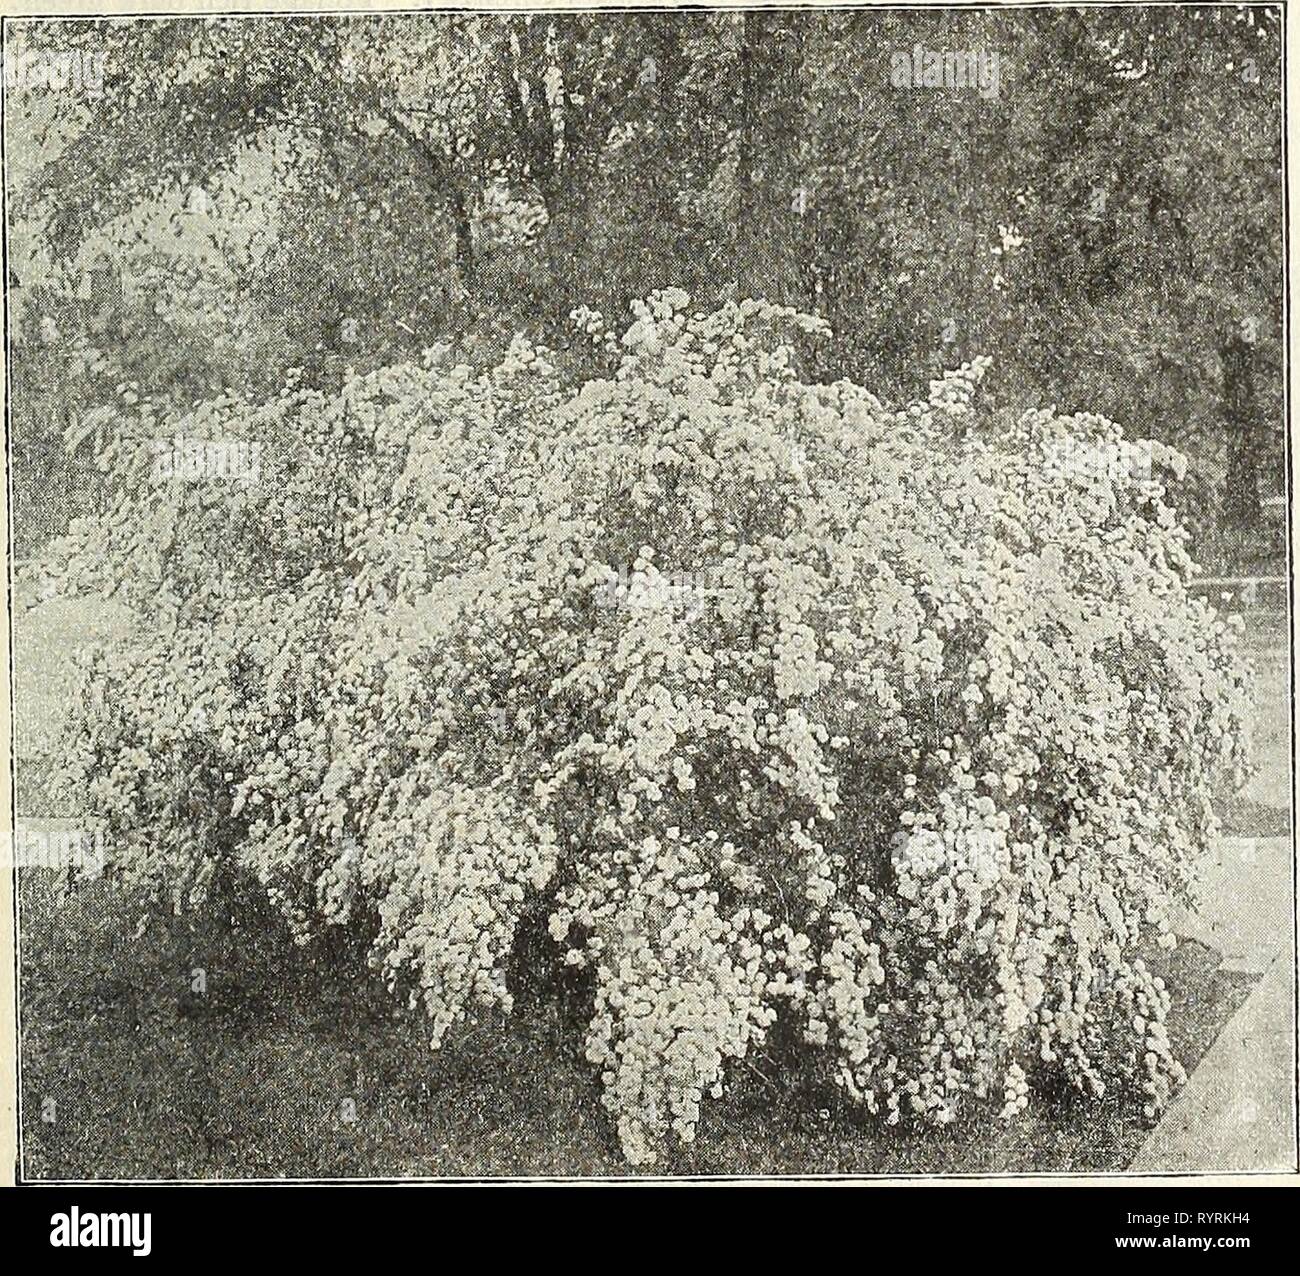 Dreer's mid-summer catalogue 1916 (1916) Dreer's mid-summer catalogue 1916 . dreersmidsummerc1916henr Year: 1916  Viburnum CAKrEsu Viburnum Carlesi. (New.) An introduction from Korea, producing its delicately spice-scented flowers in May and June. The buds before expanding are of an attractive pink color and develop into Bouvardia-like umbels of white flowers, which last in fresh condition for a long time; entirely distinct and most desirable, f 1.00 each. — Opulus {HighBush Cranberry). The white flowers in June are followed in Autumn by bright scarlet berries, which are very attractive until  Stock Photo